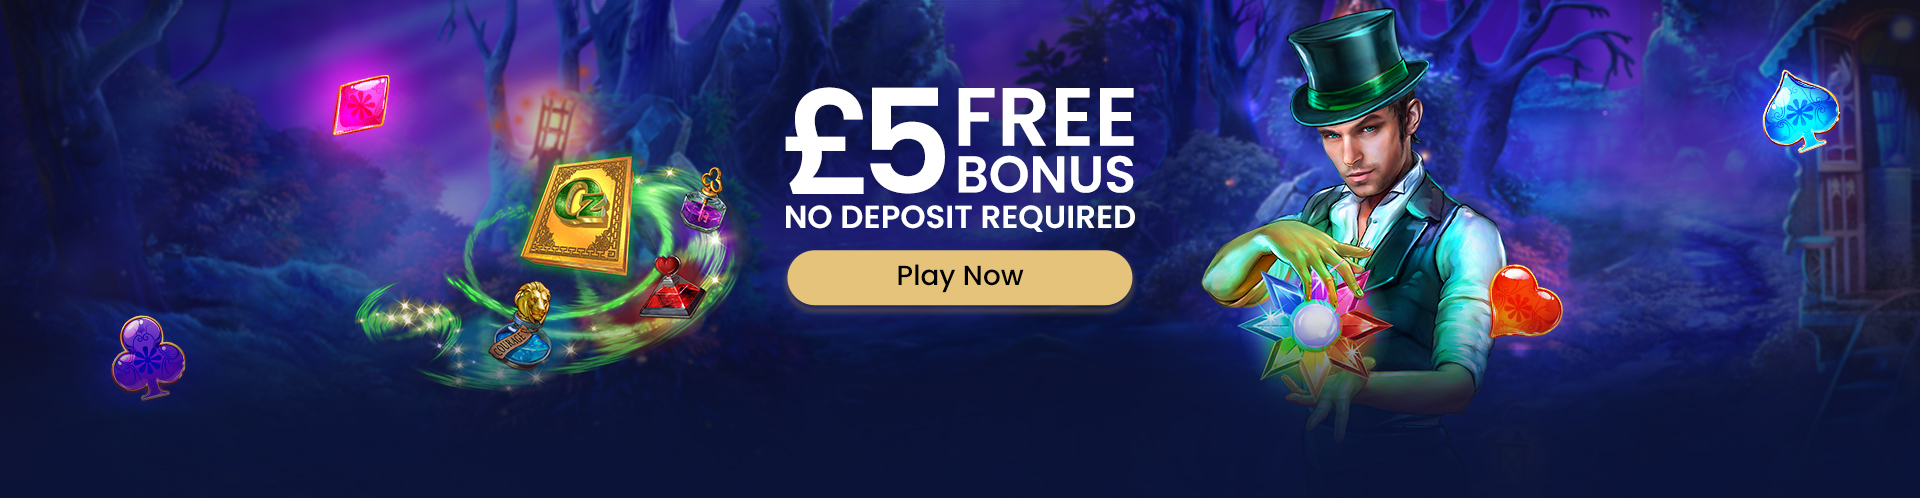 Pay By Mobile Casino Sky Mobile